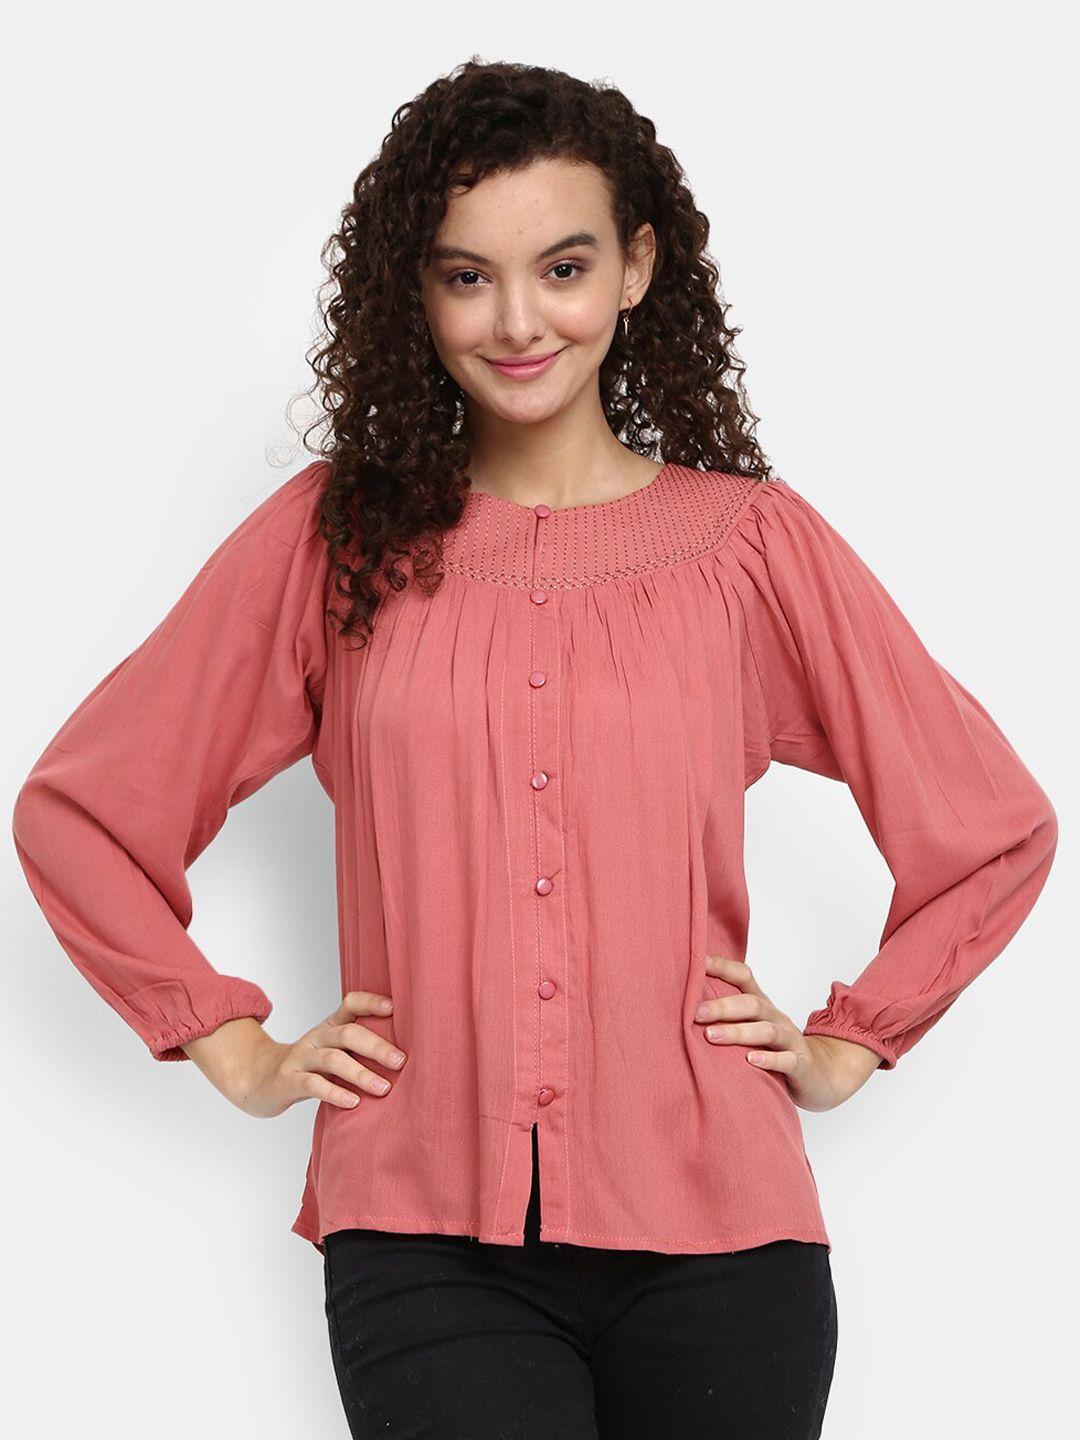 v-mart peach-coloured solid georgette top